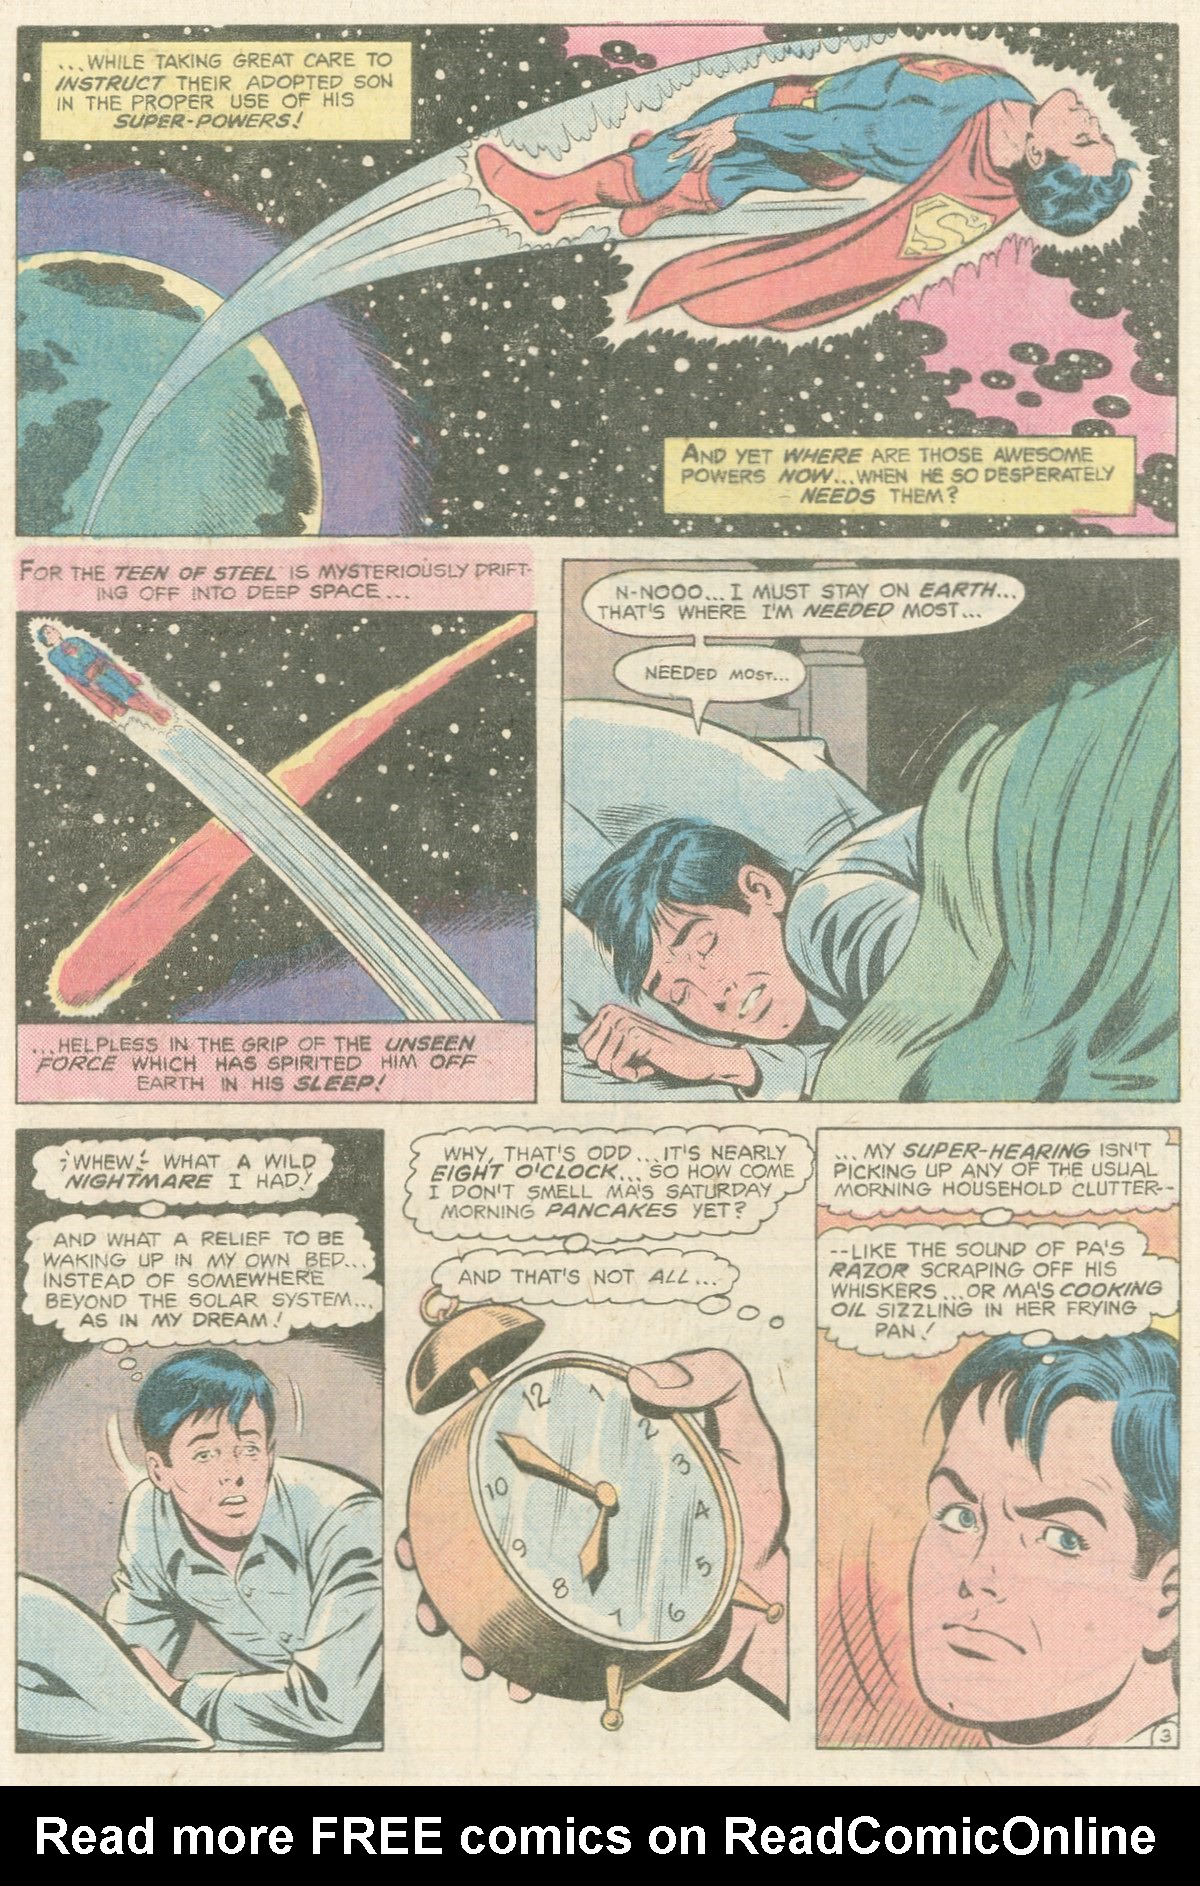 The New Adventures of Superboy 20 Page 3